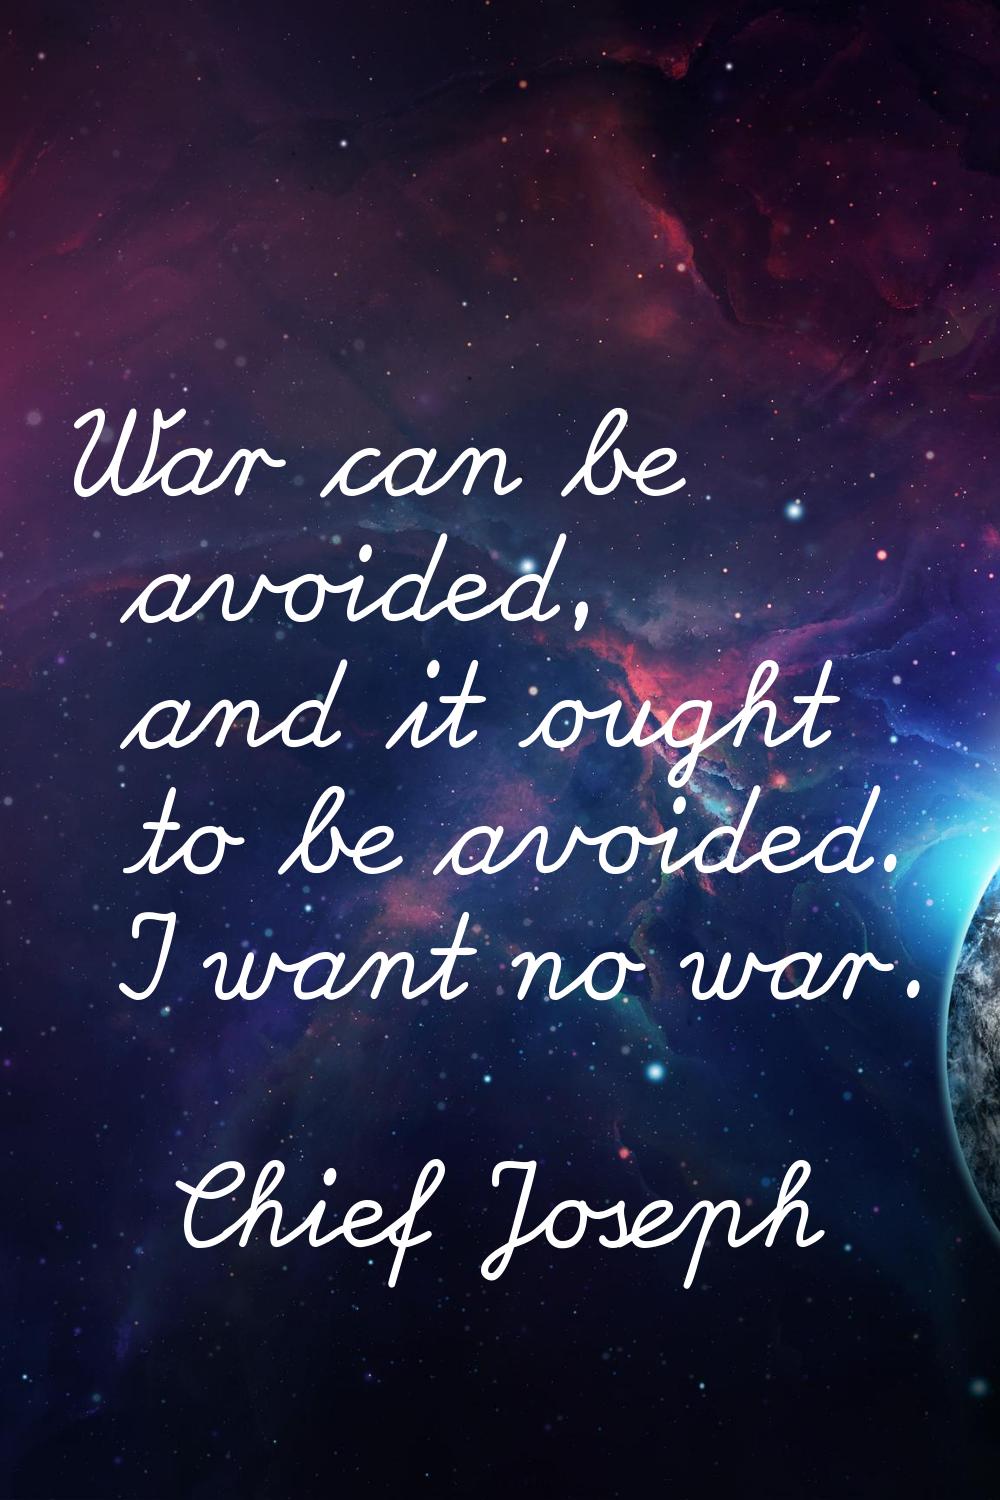 War can be avoided, and it ought to be avoided. I want no war.